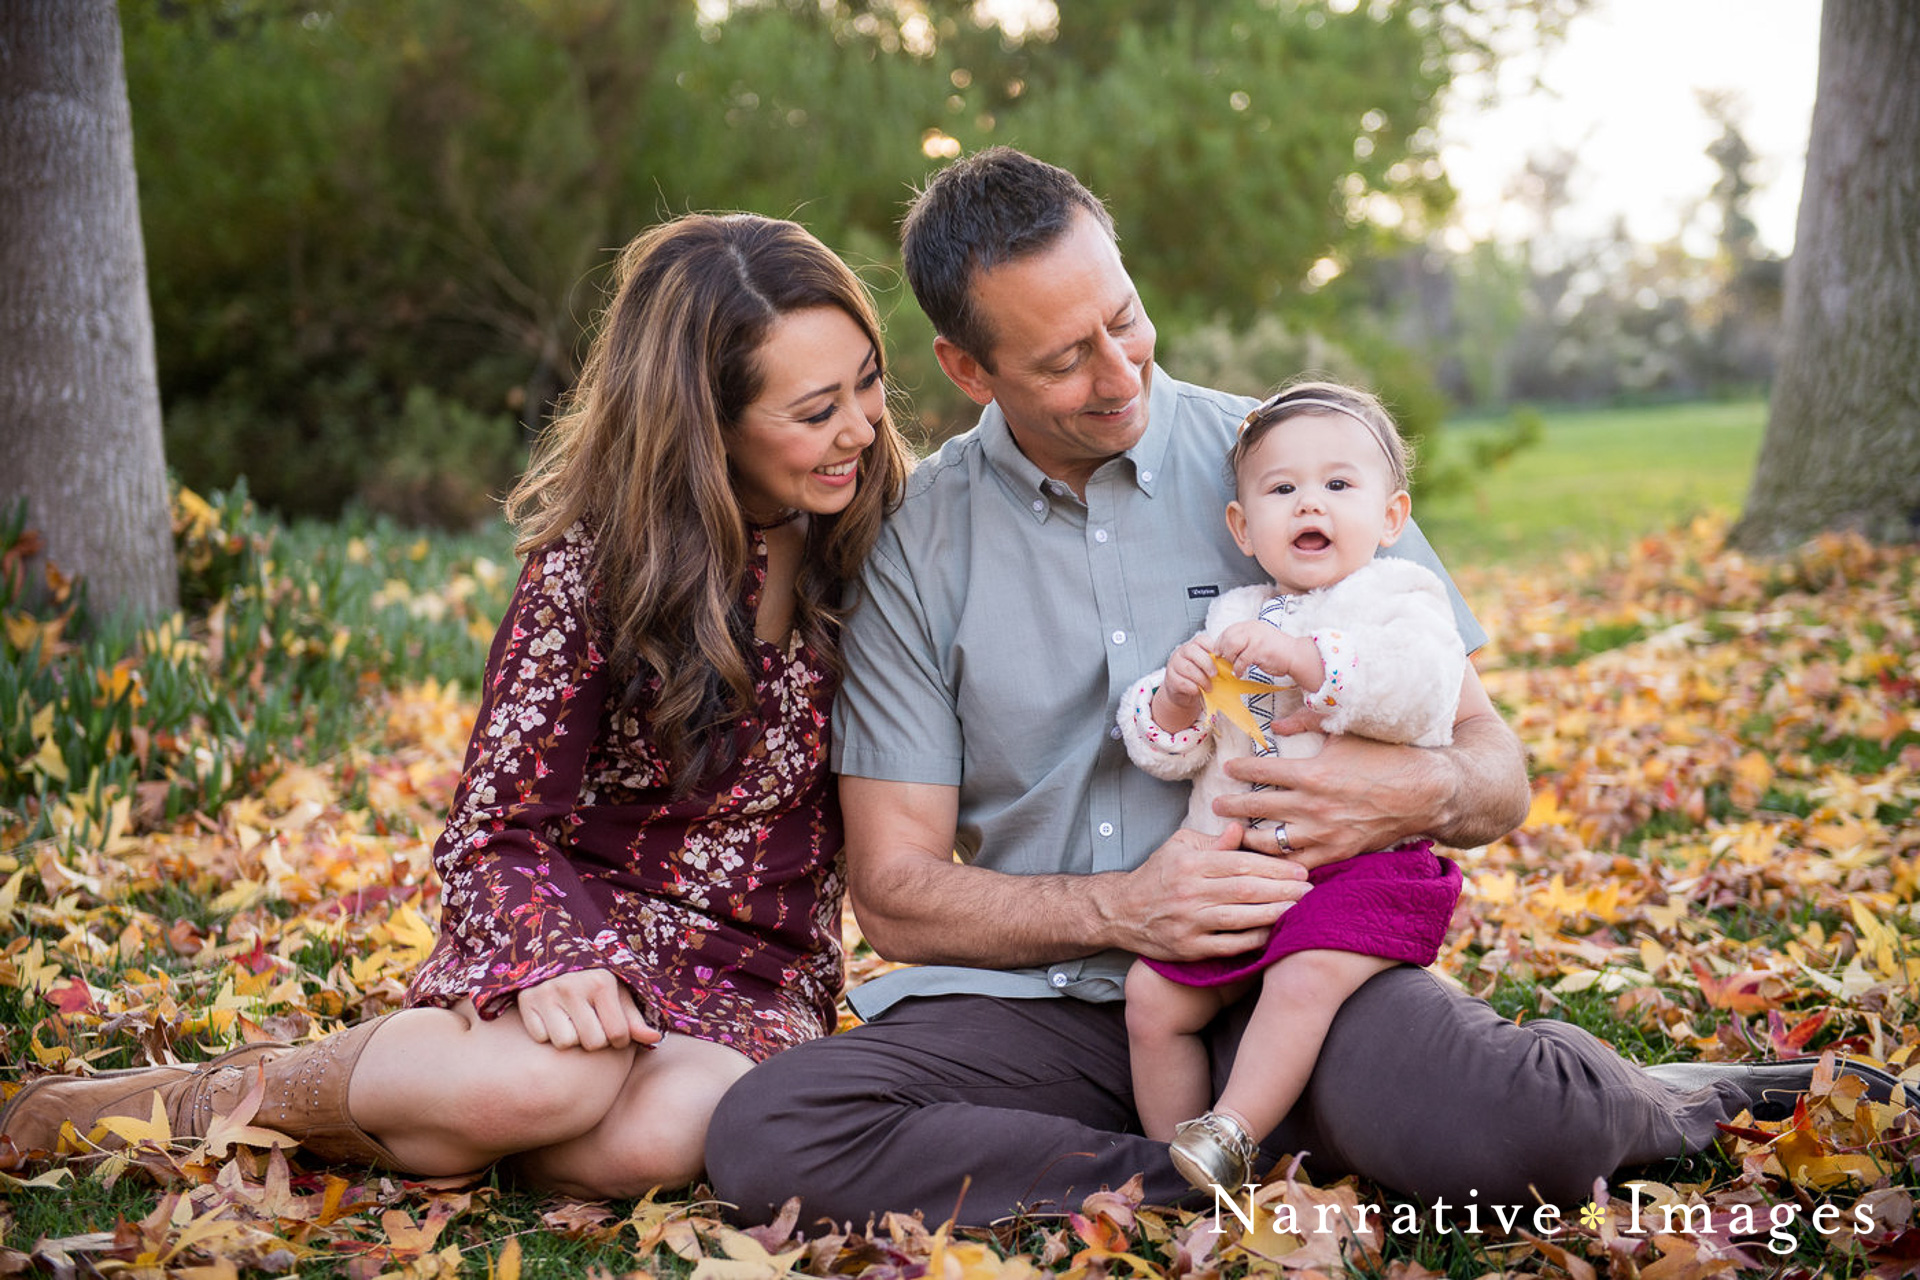 candid portrait of two parents with toddler girl in fall leaves